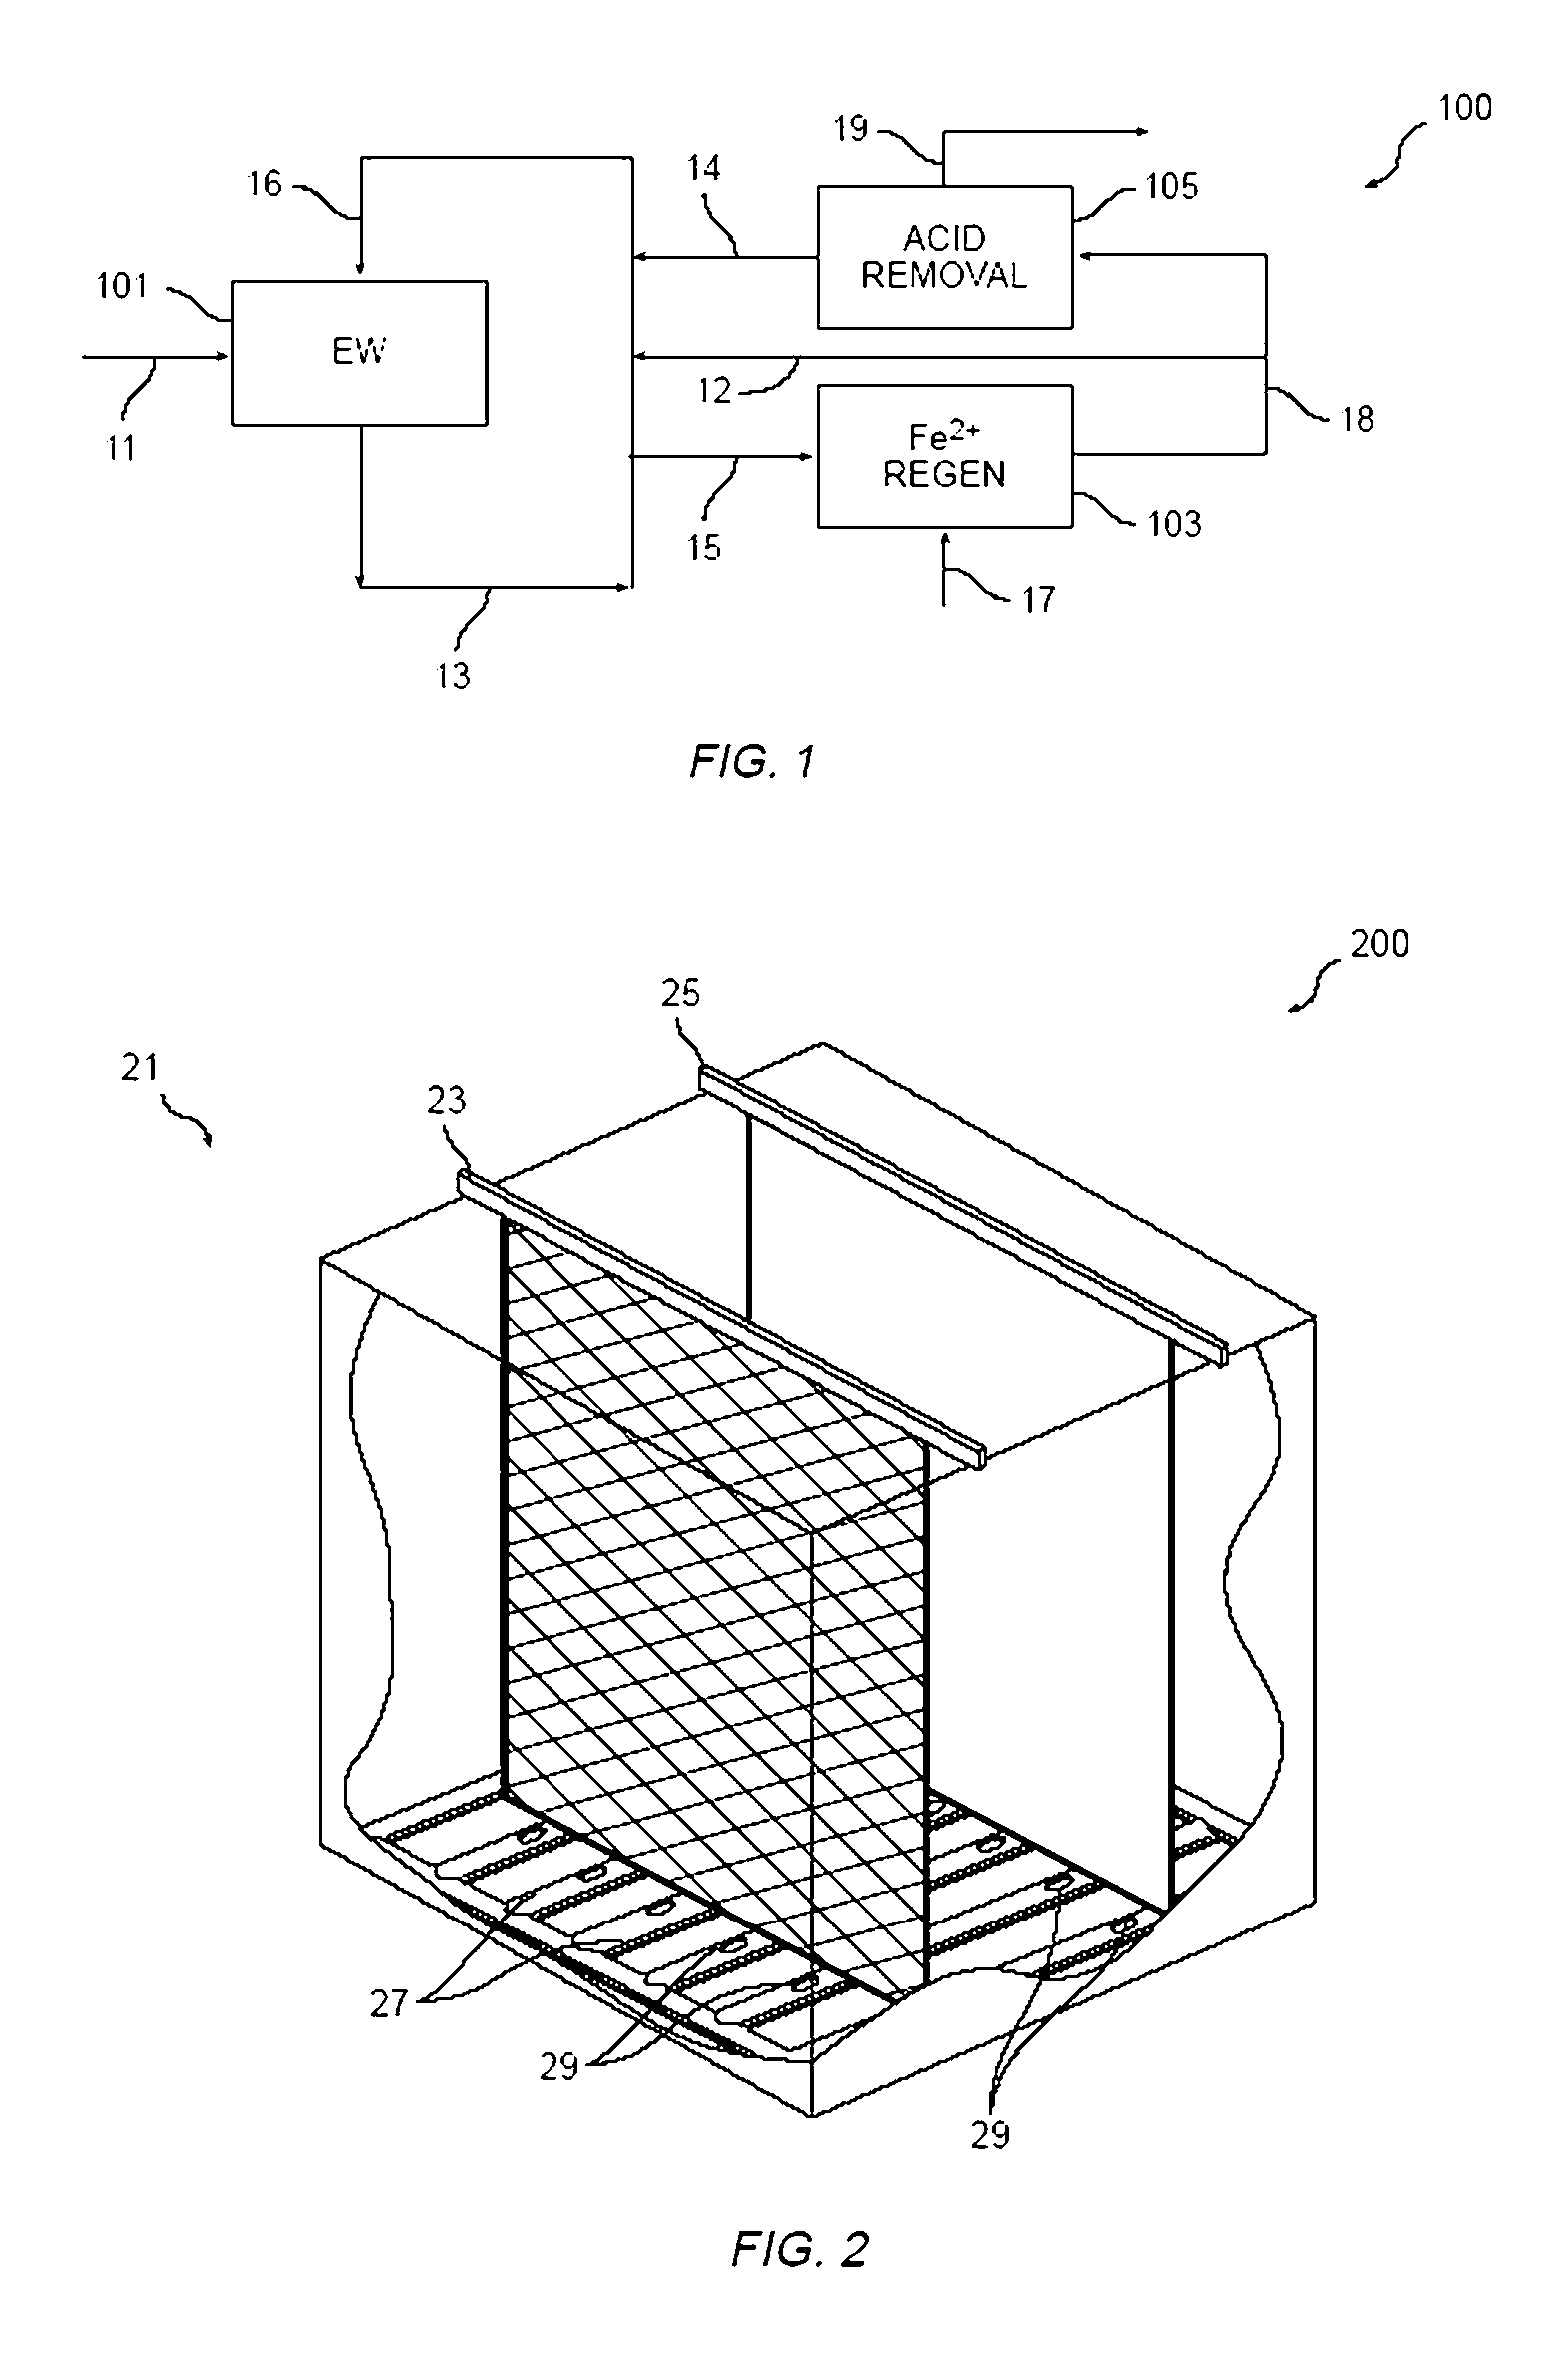 Method and apparatus for electrowinning copper using the ferrous/ferric anode reaction and a flow-through anode